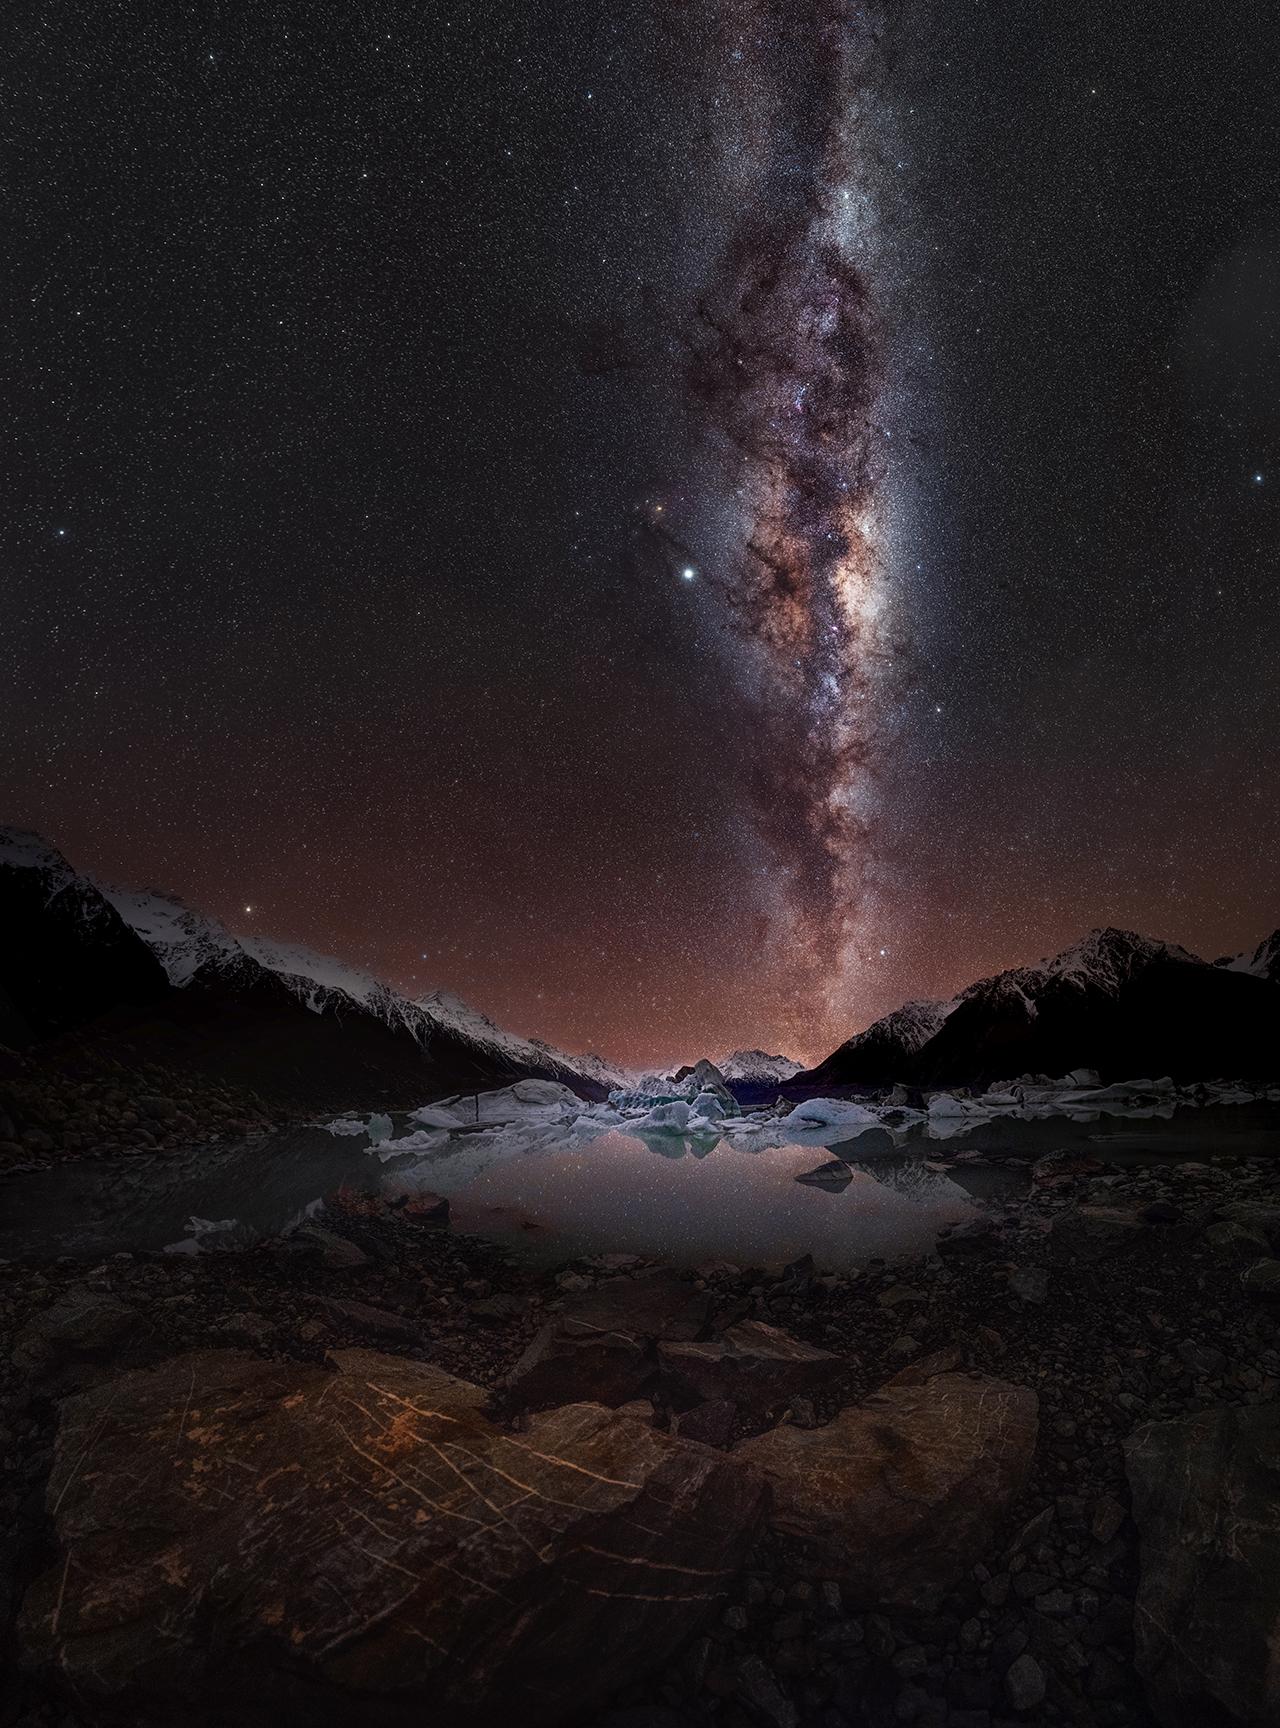 The Milky Way in tones of violets and purples and browns in the sky behind snowy mountains and a lake